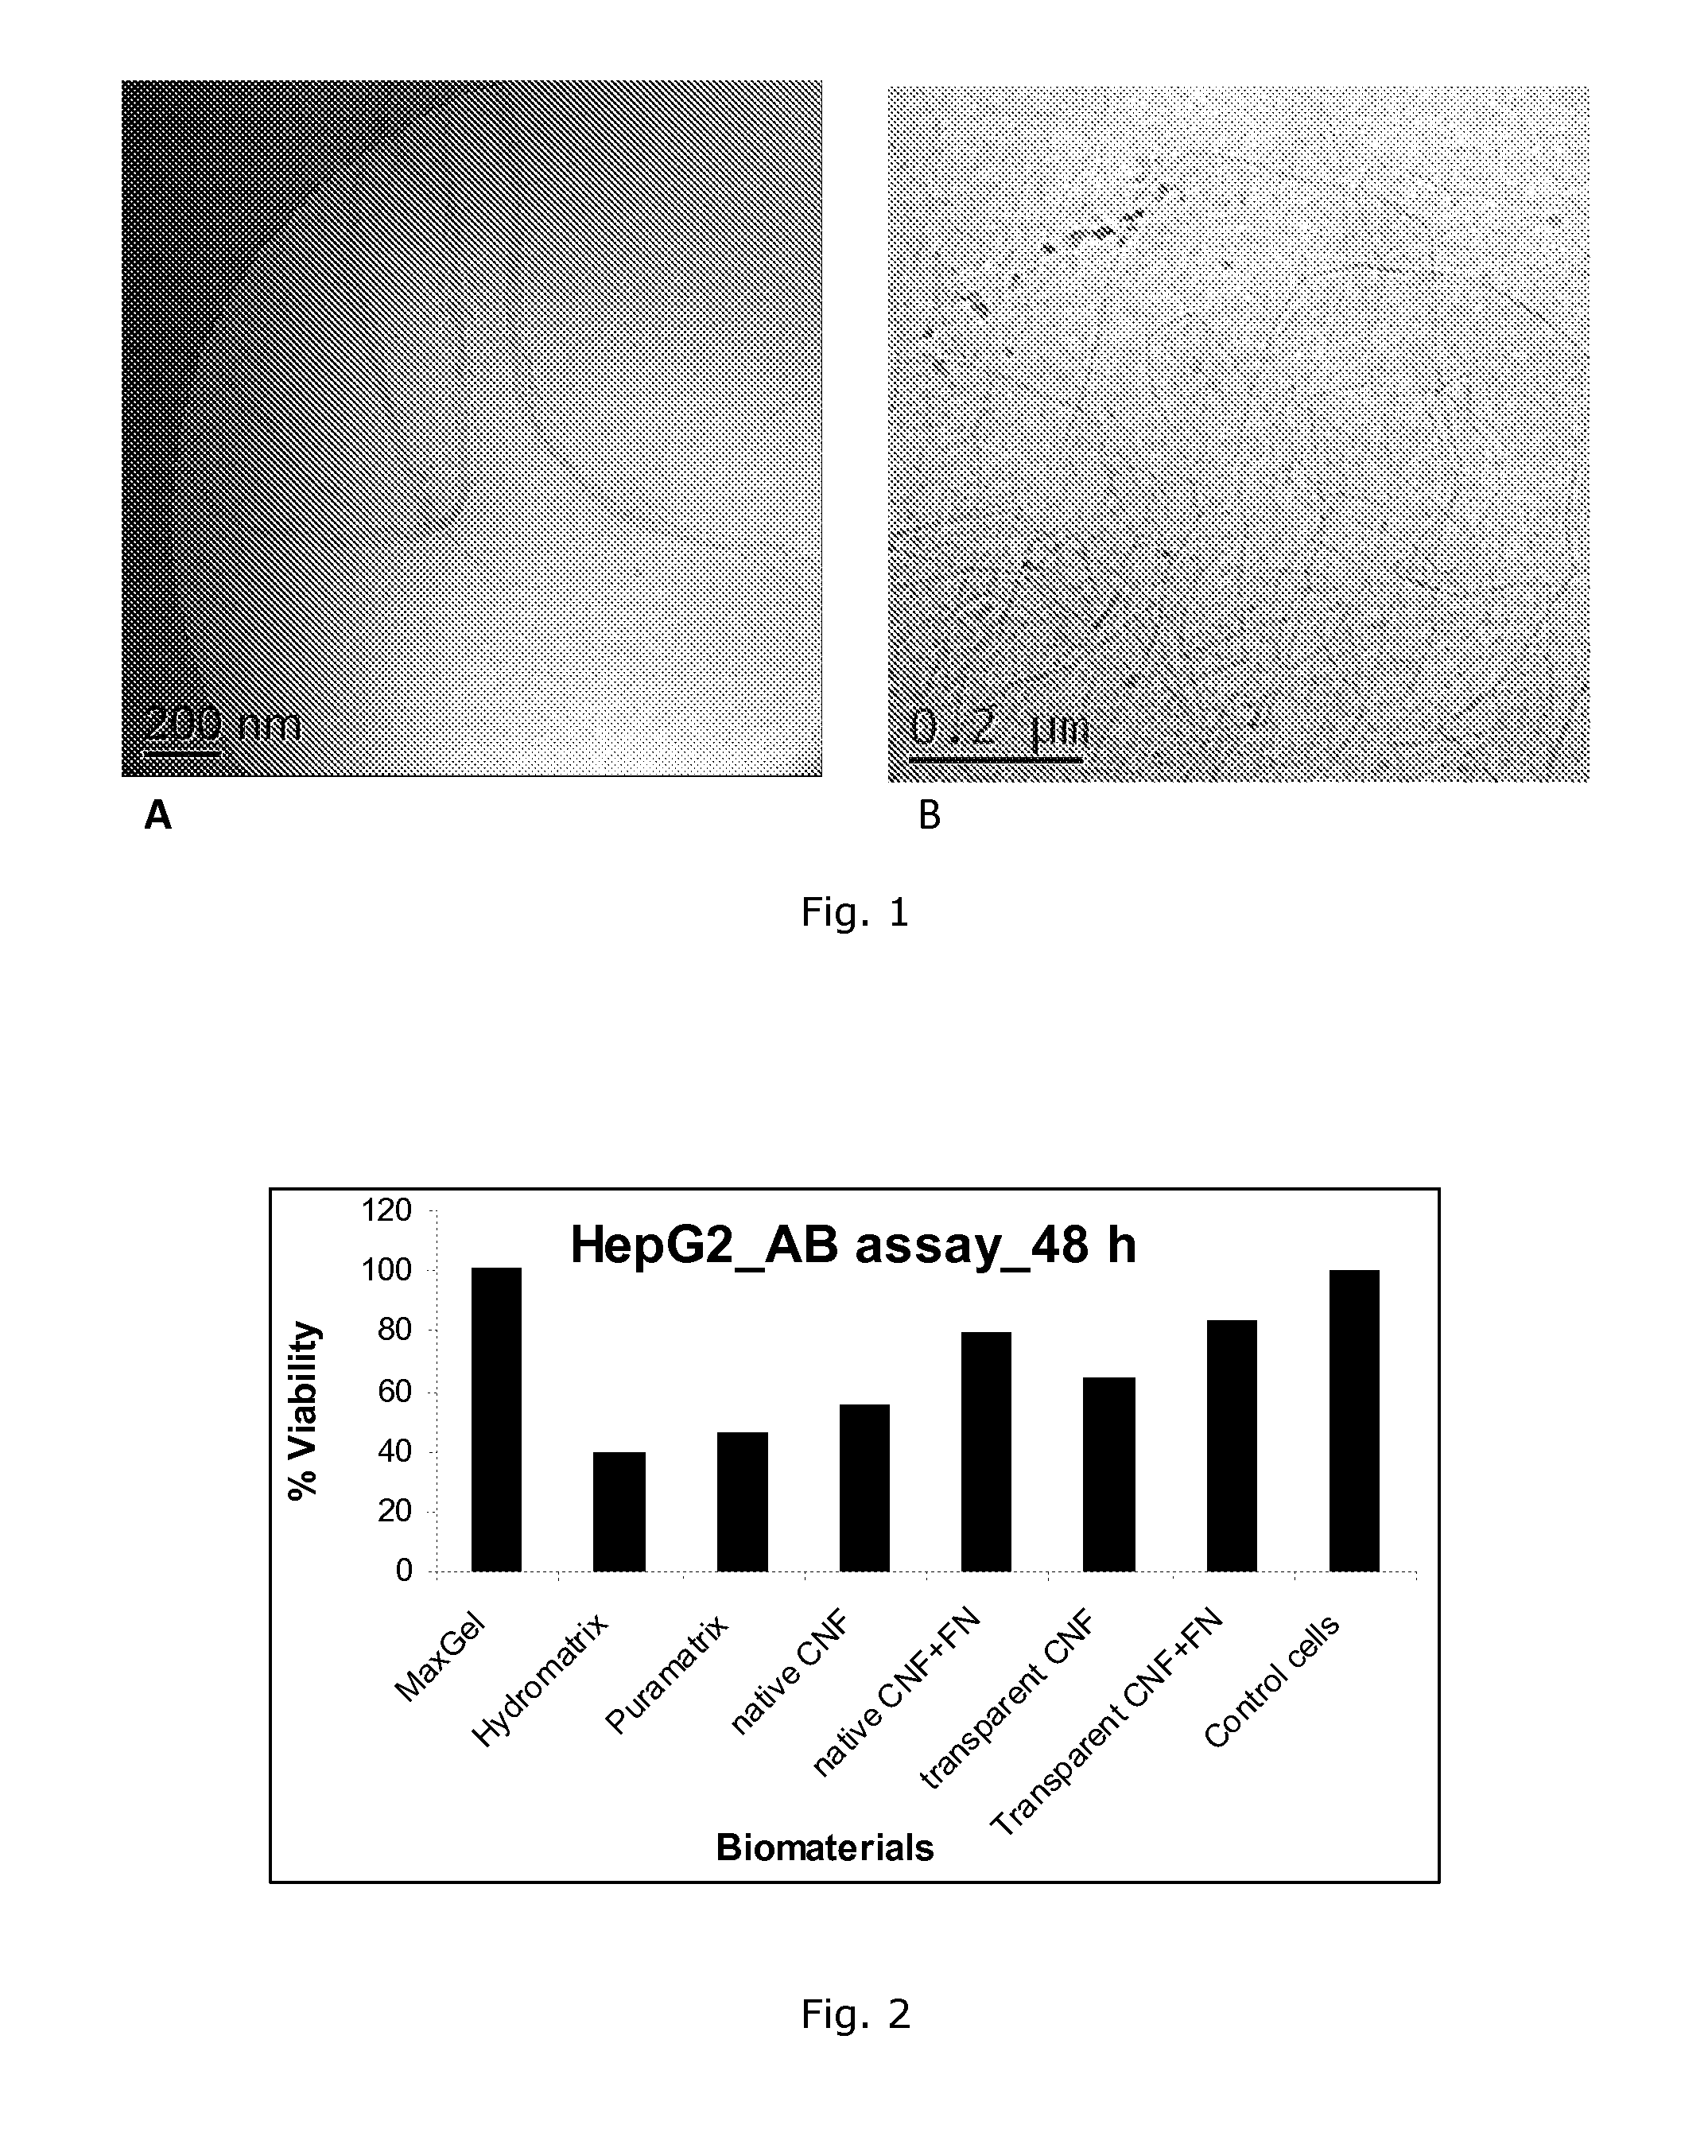 Plant derived cell culture material